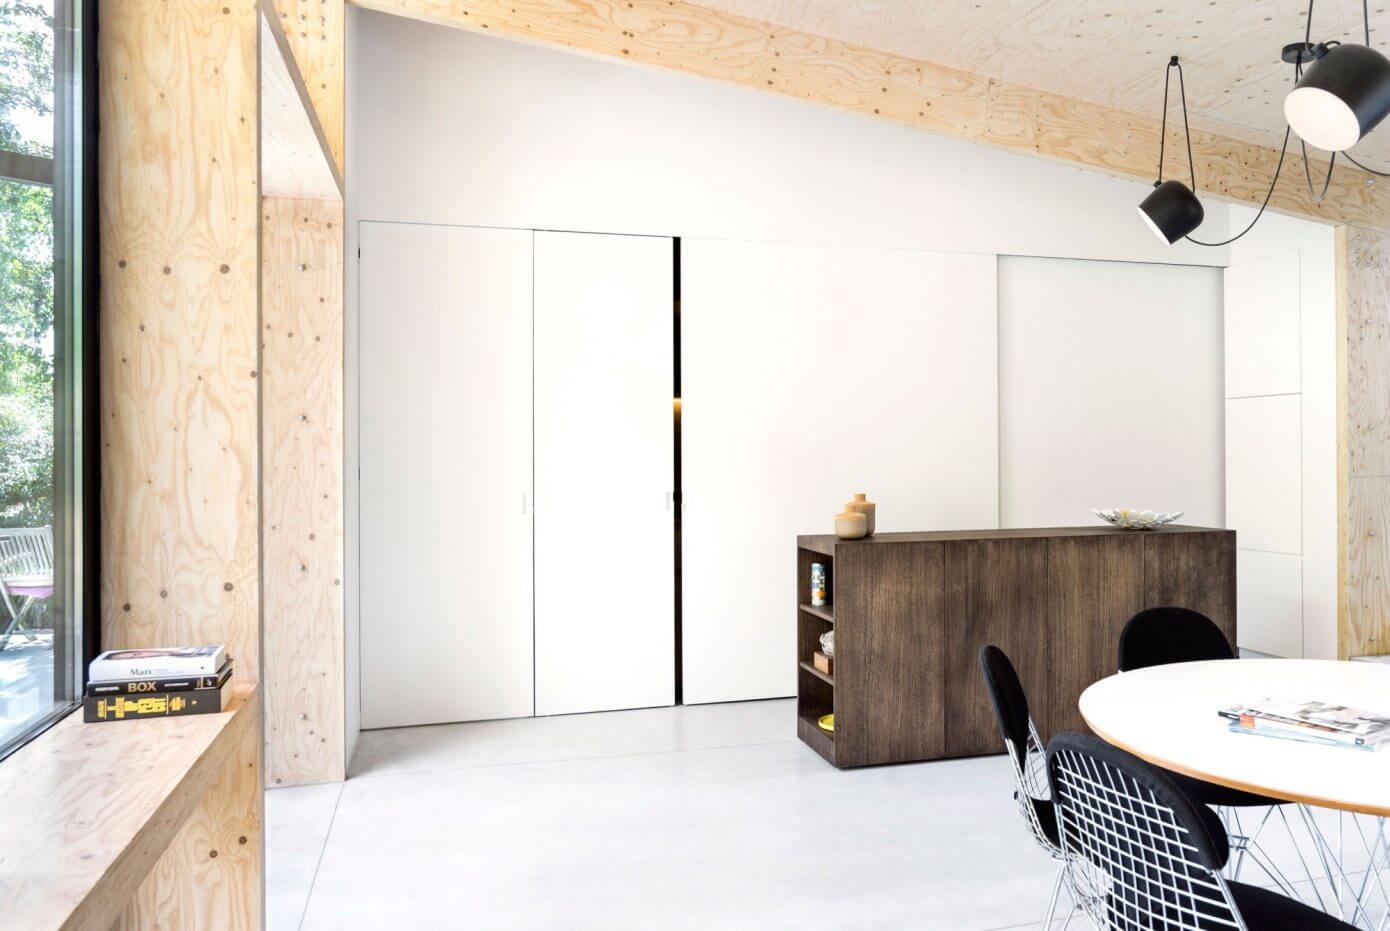 House in Leuven by Rob Mols and Studio K